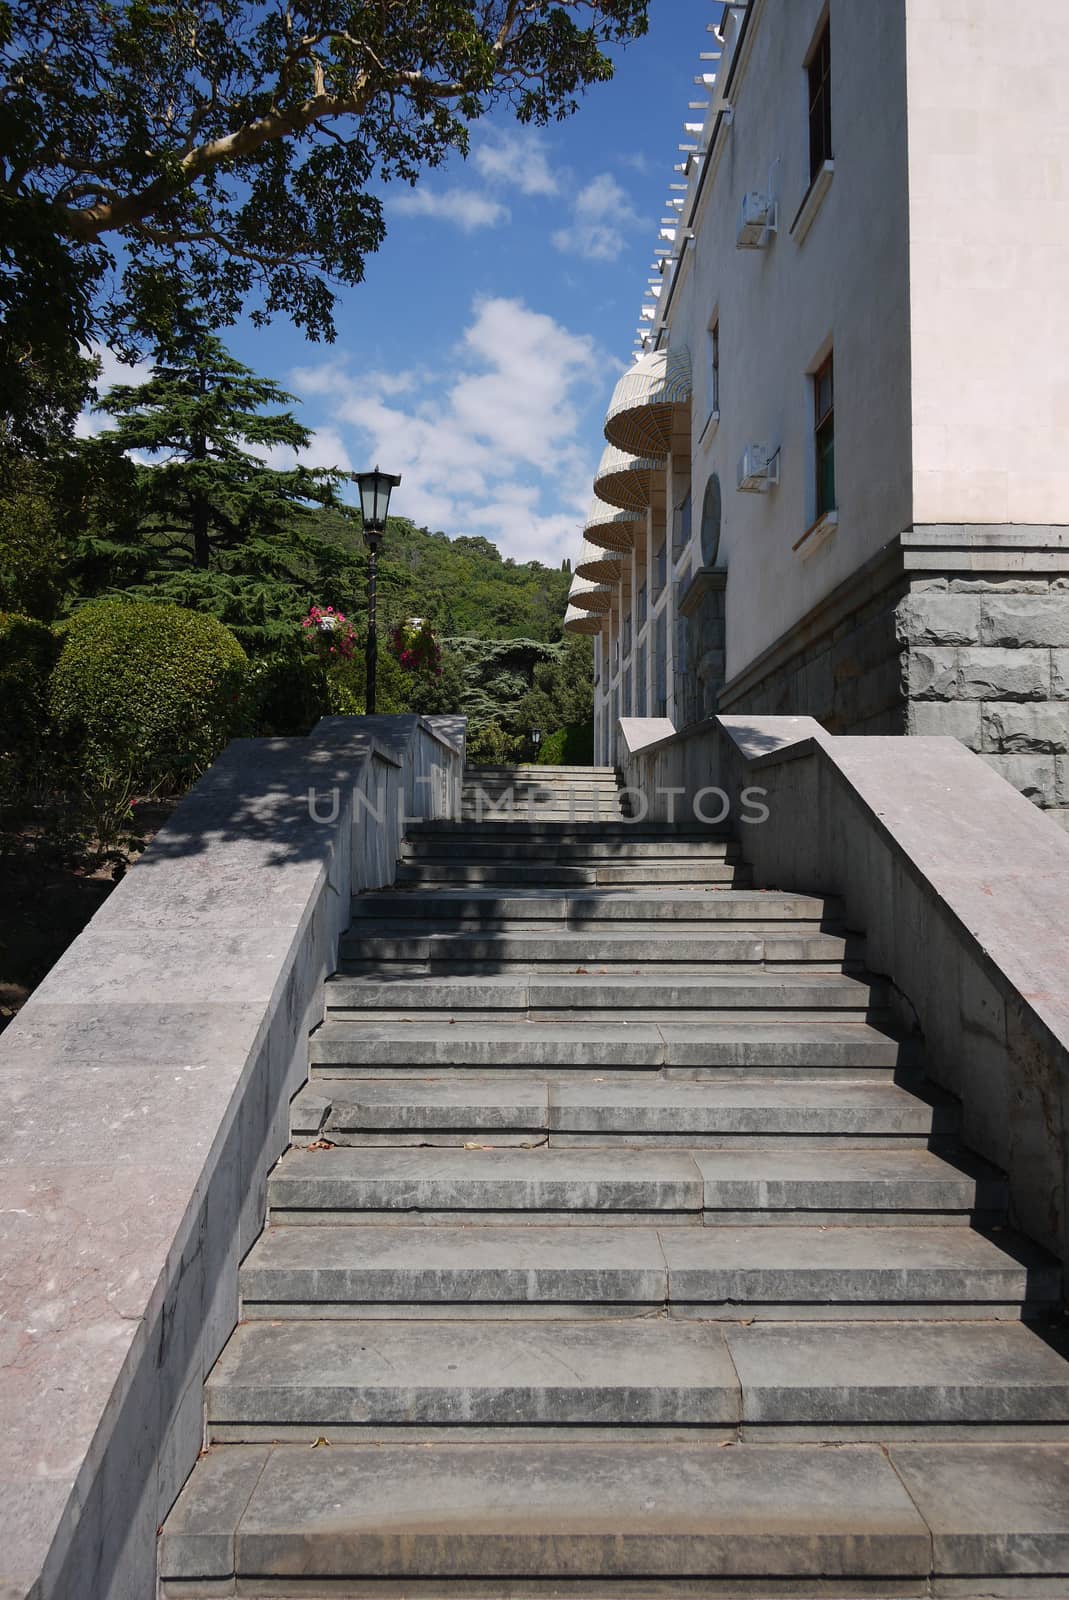 A ladder with granite steps going up along the building and mountain slopes in the distance by Adamchuk